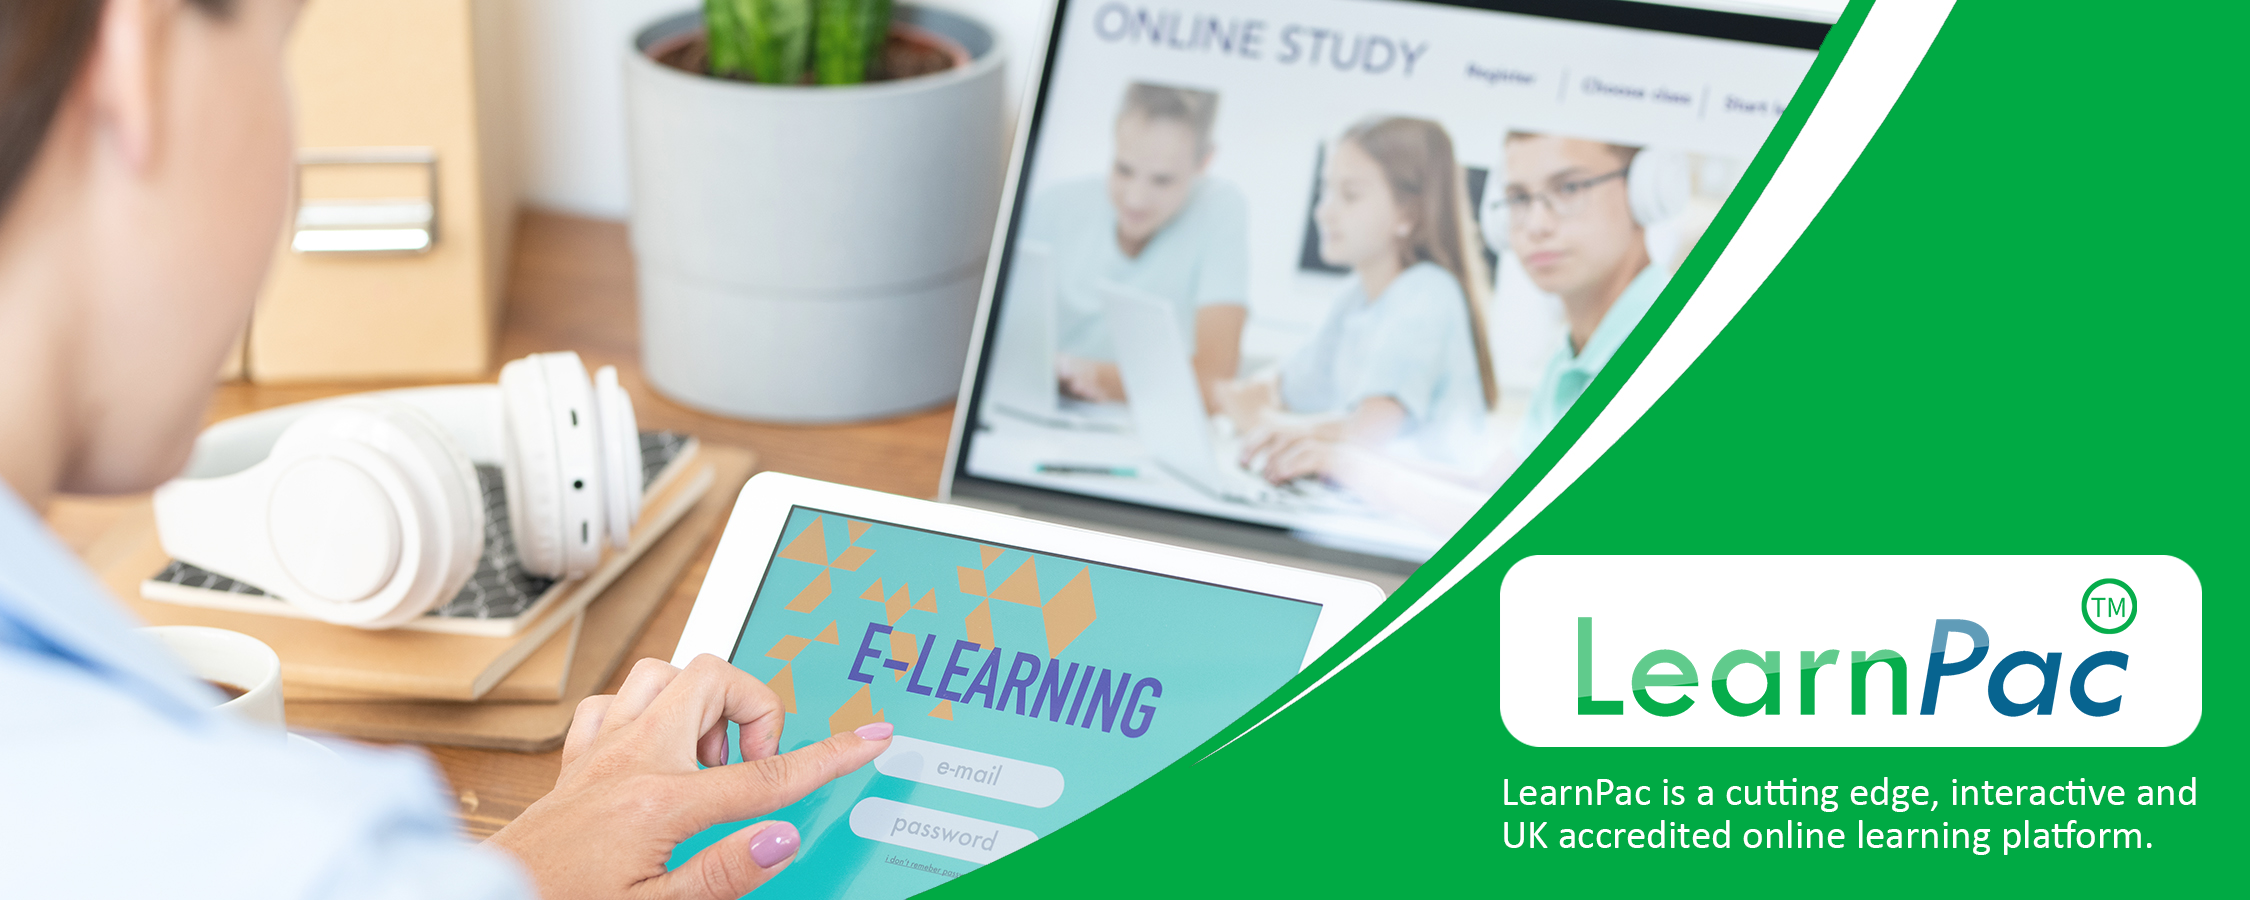 Wellbeing Essentials - eLearning Course - CPD Certified - LearnPac Systems UK -